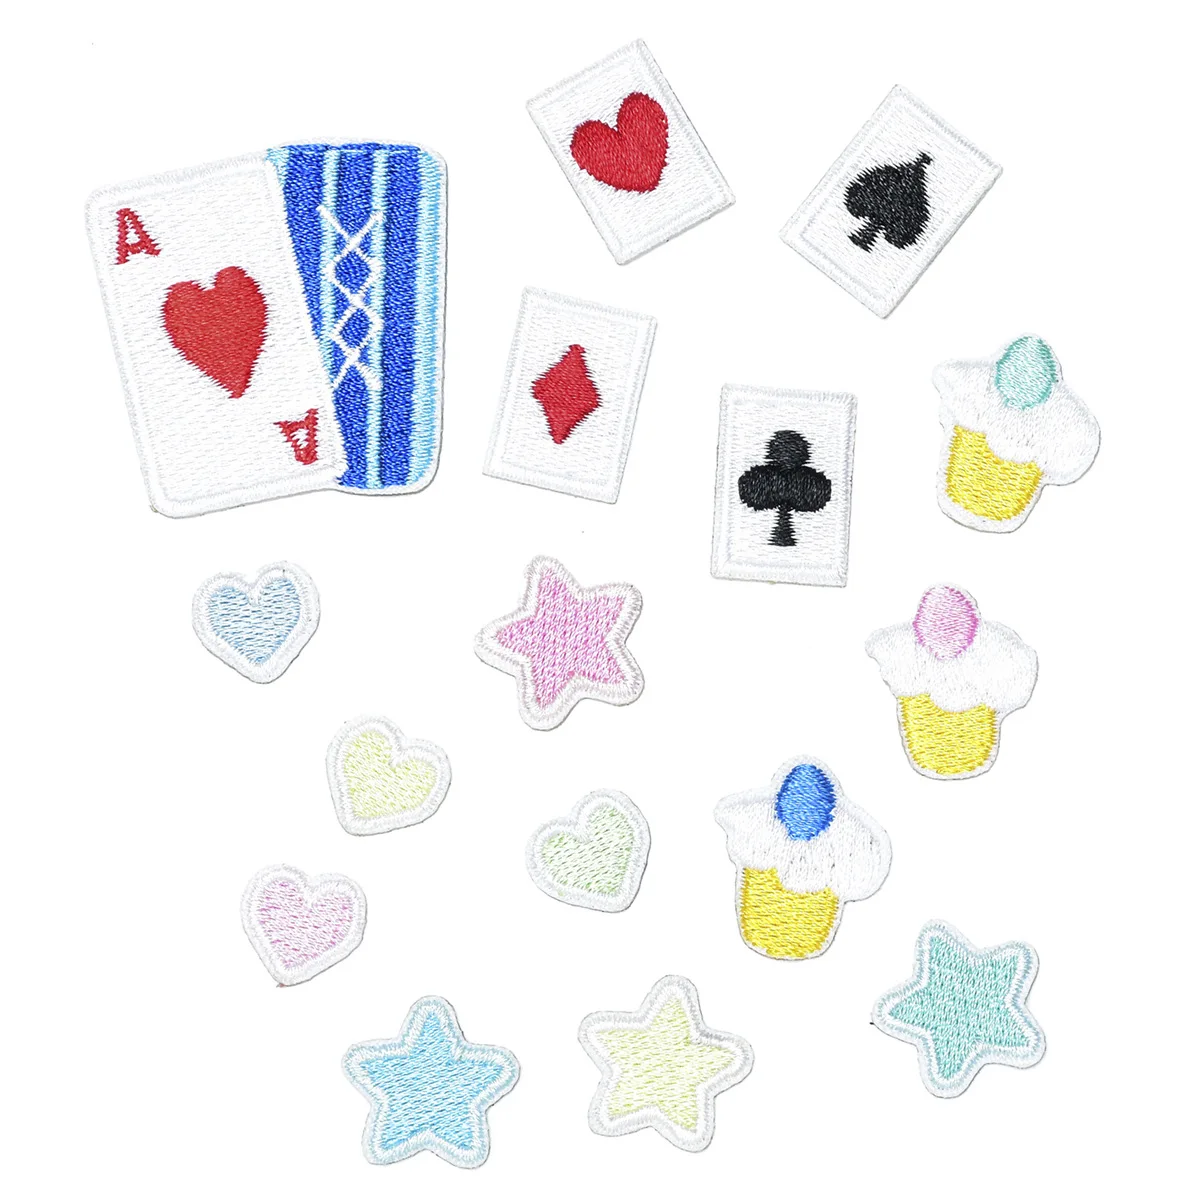 

100pcs/Lot Stick-on Small Embroidery Patch Poker Cake Star Red Heart Shirt Bag Clothing Decoration Accessory Craft Diy Applique